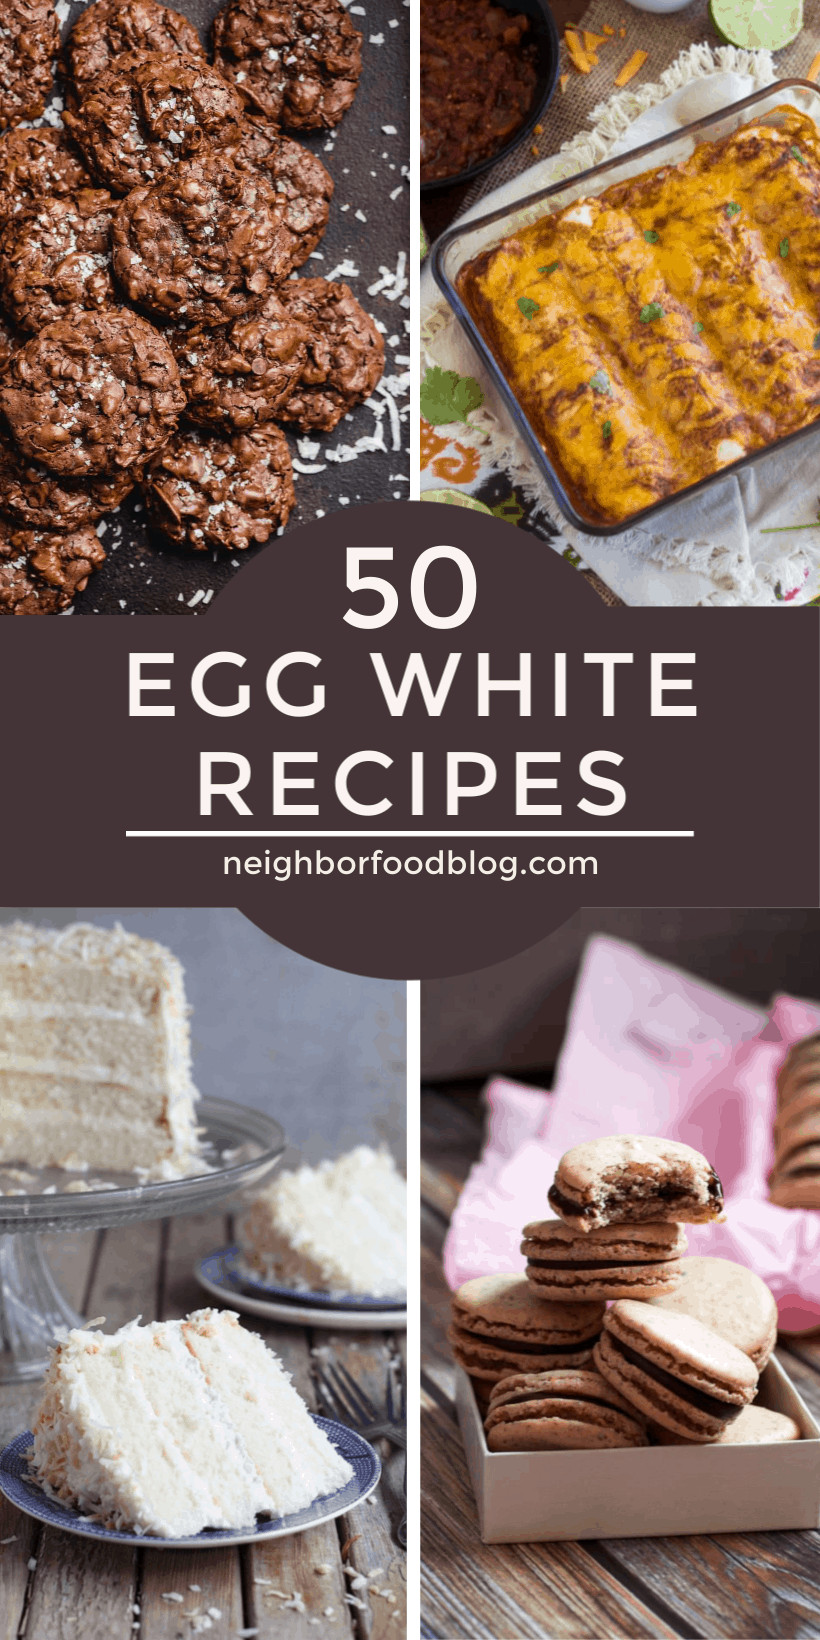 Egg White Desserts
 This collection of egg white recipes is perfect for using